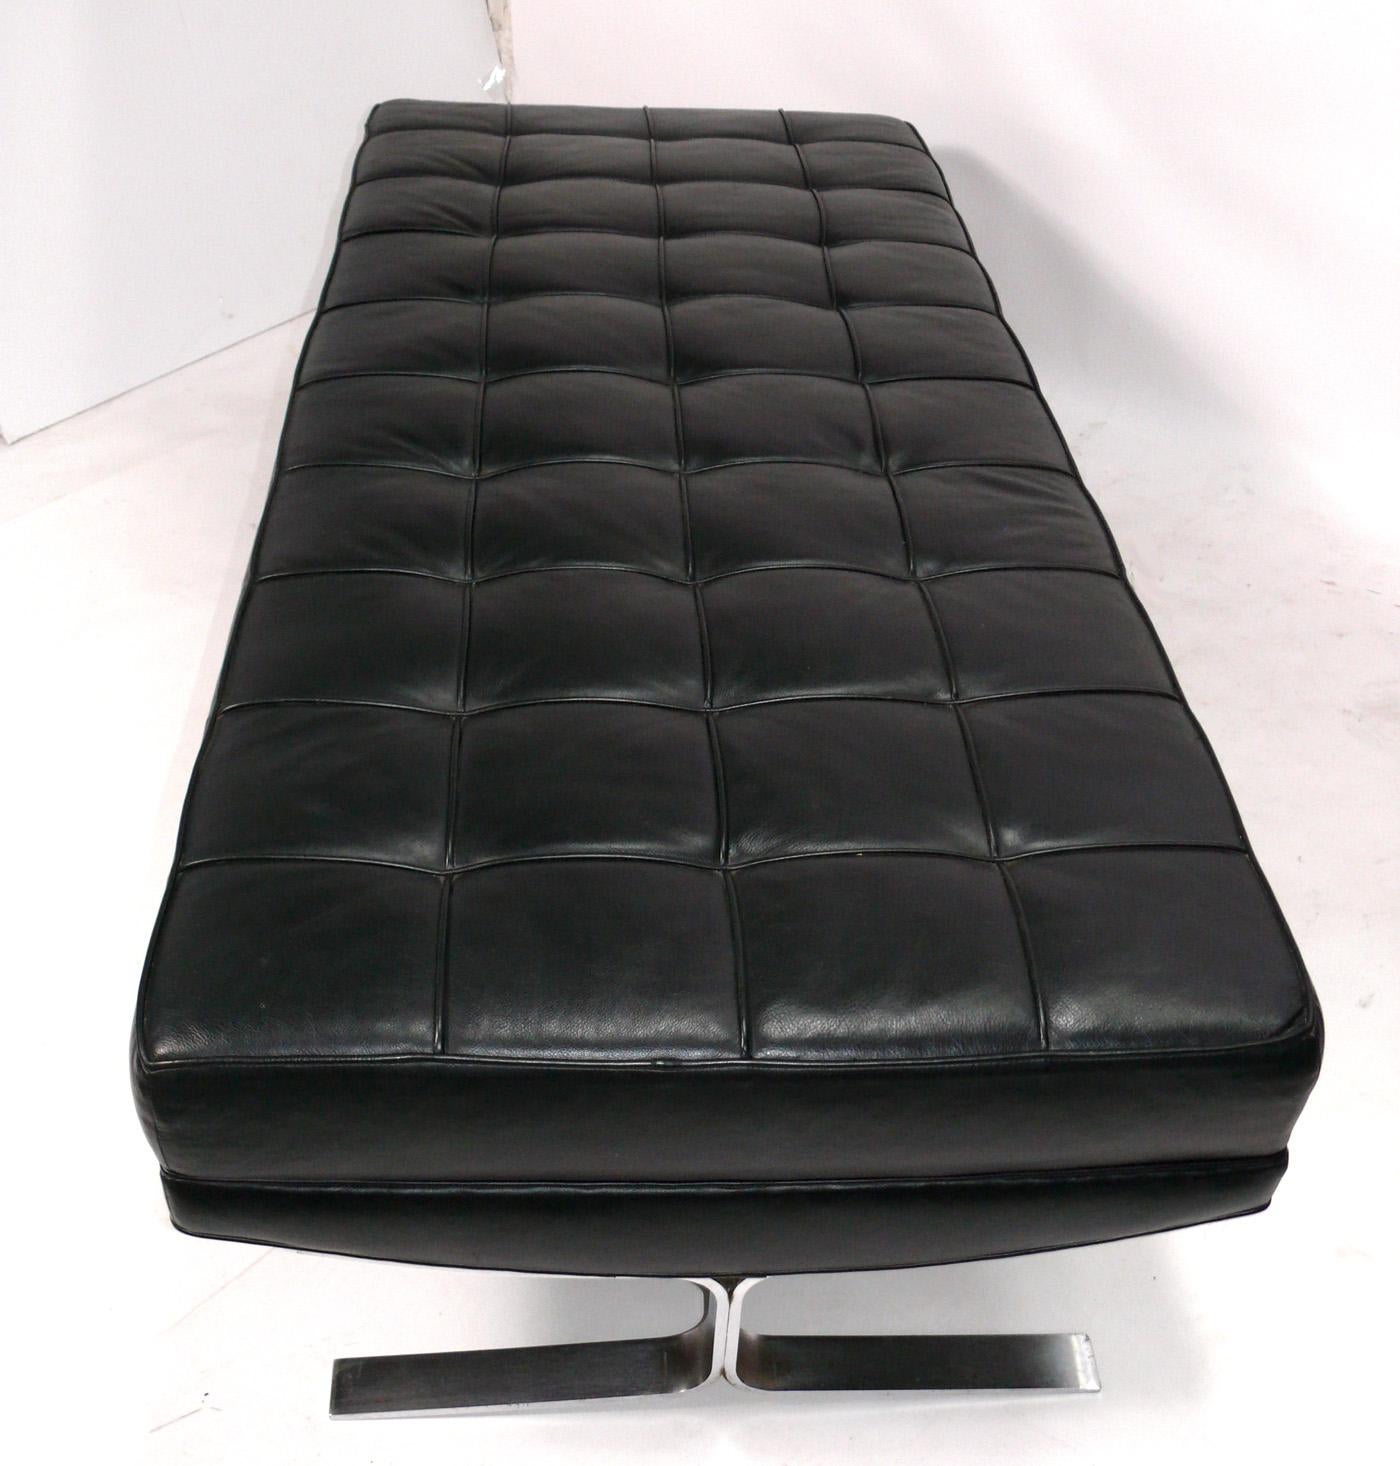 Clean Lined Tufted Black Leather and Satin Chrome Leg Bench, attributed to Nicos Zographos, unsigned, American, circa 1960s. The leather has been cleaned and conditioned. 